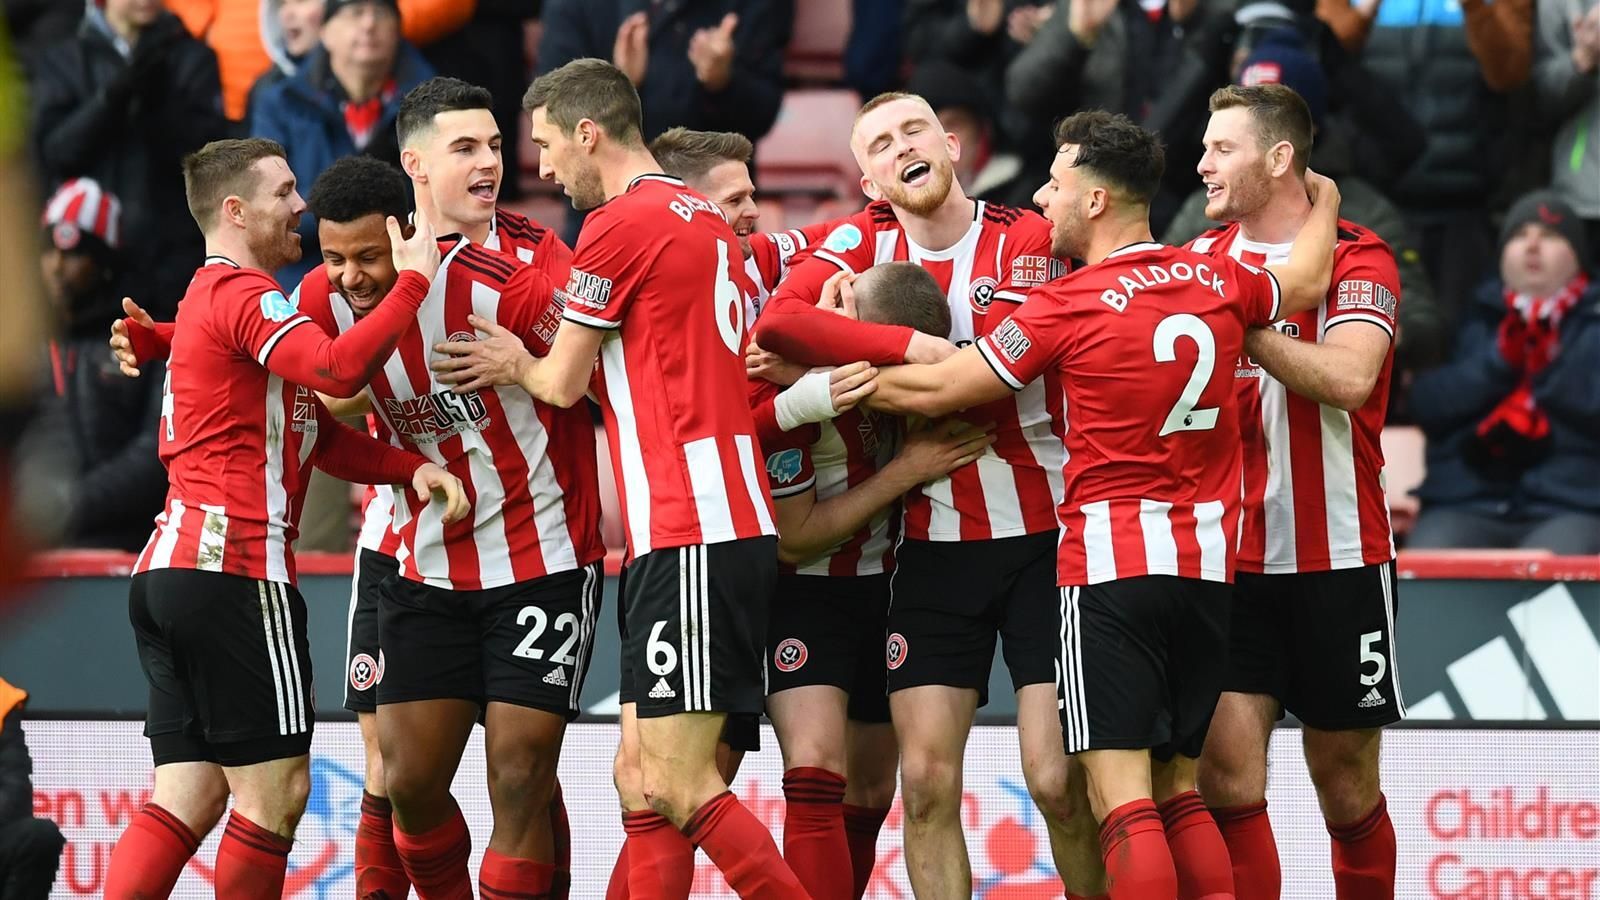 Sheffield United Wins a Slight Victory over Wolves with a Single Late Goal